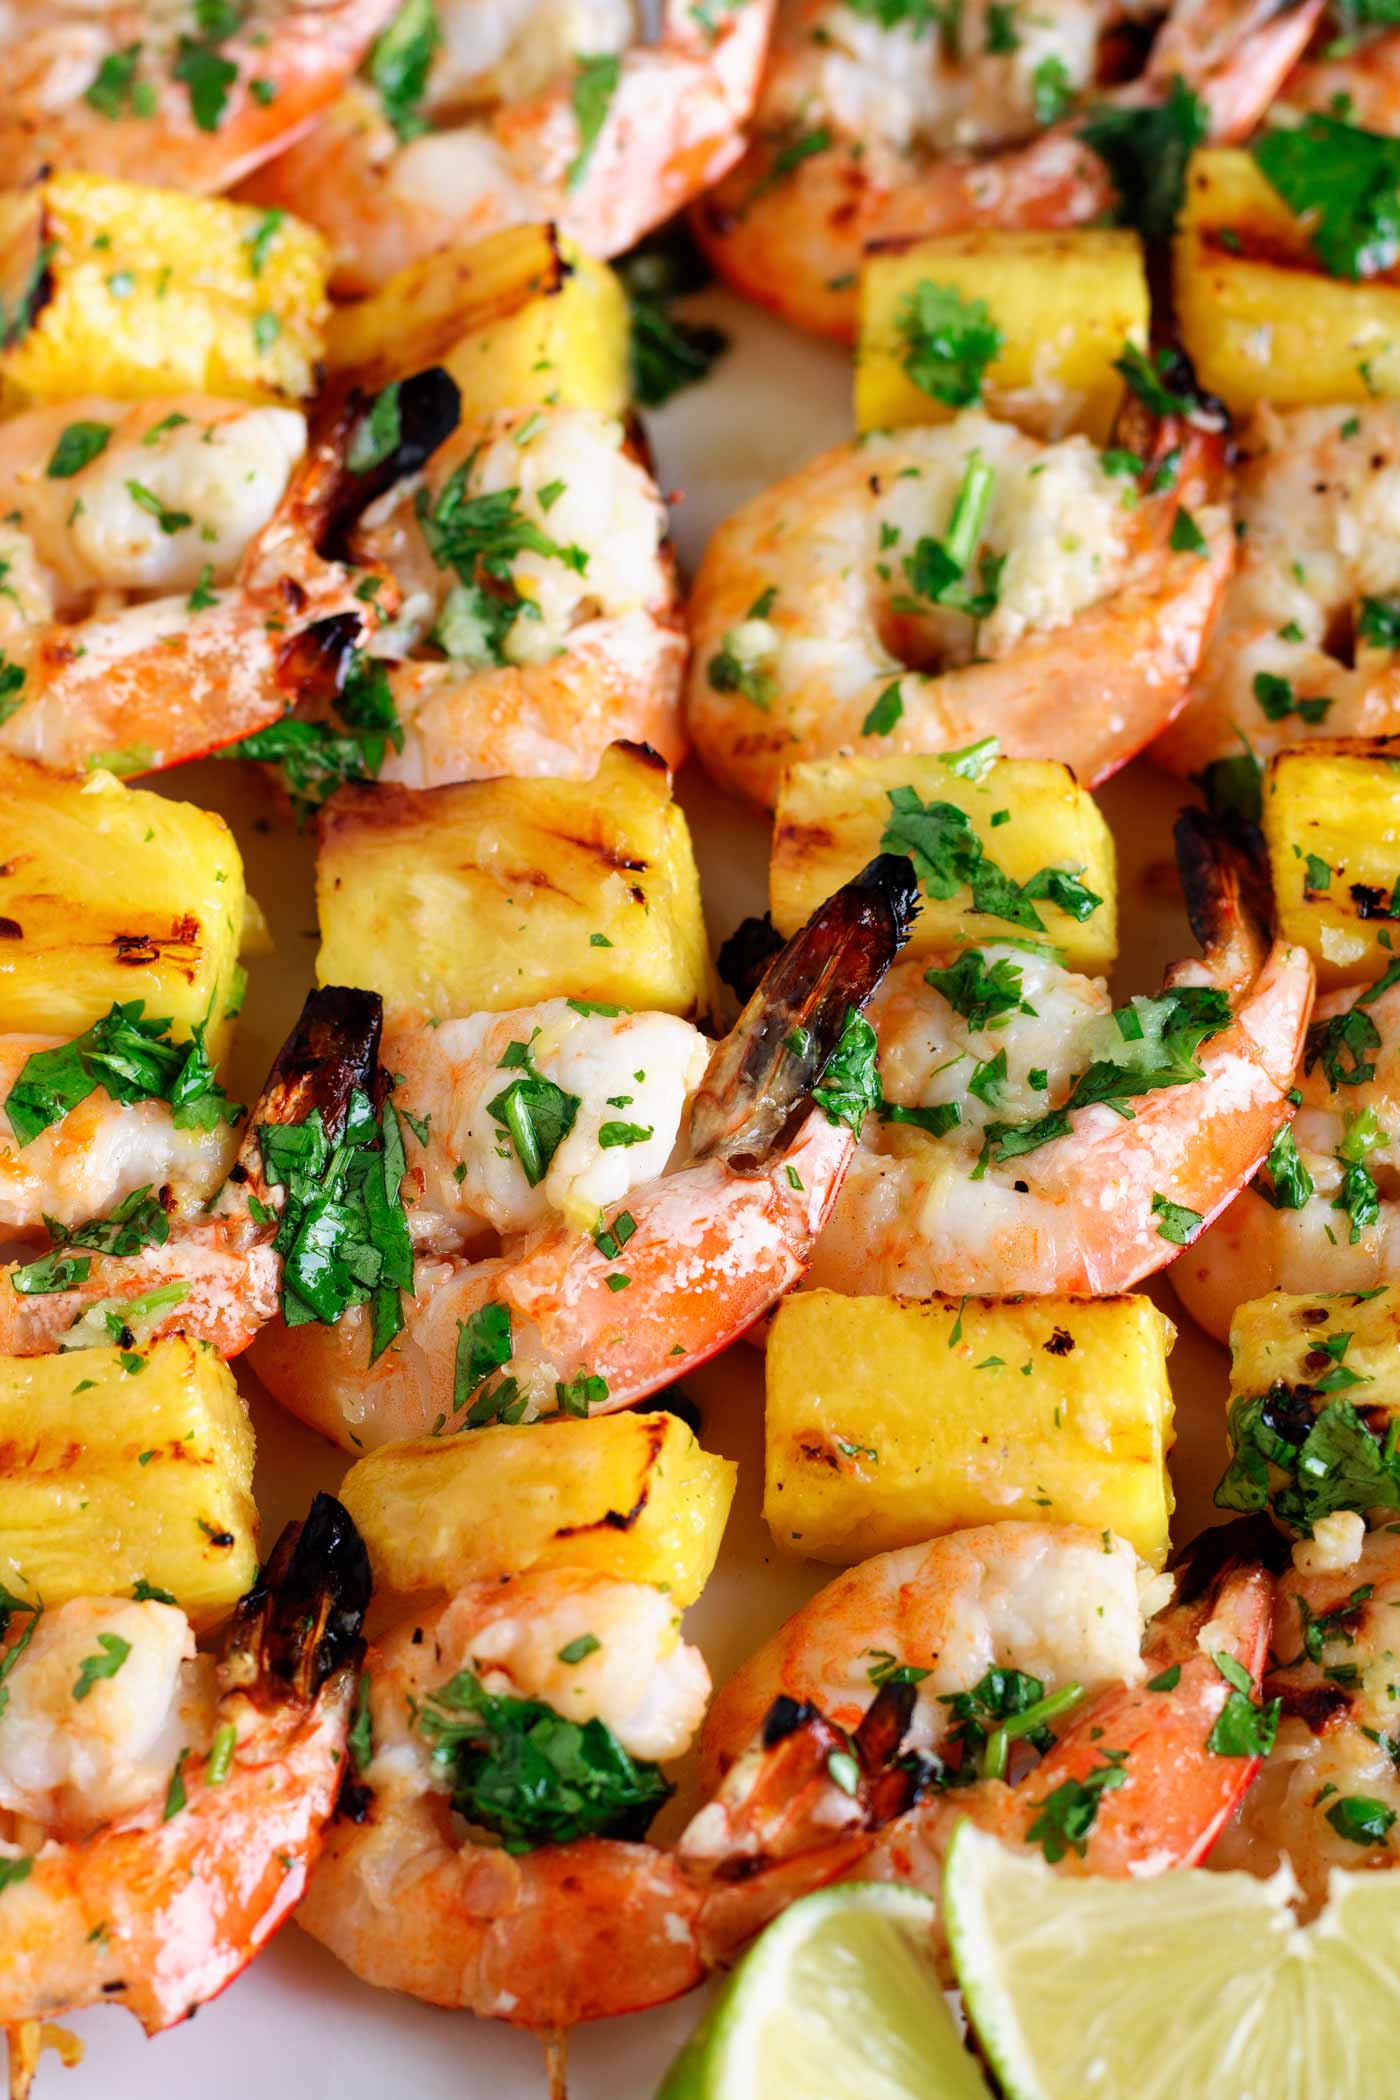 So delicous and easy! Less than 25 mins to make these grilled shrimp and pinapple skewers. Perfect for dinner or a party! Paleo, gluten free, dairy free.